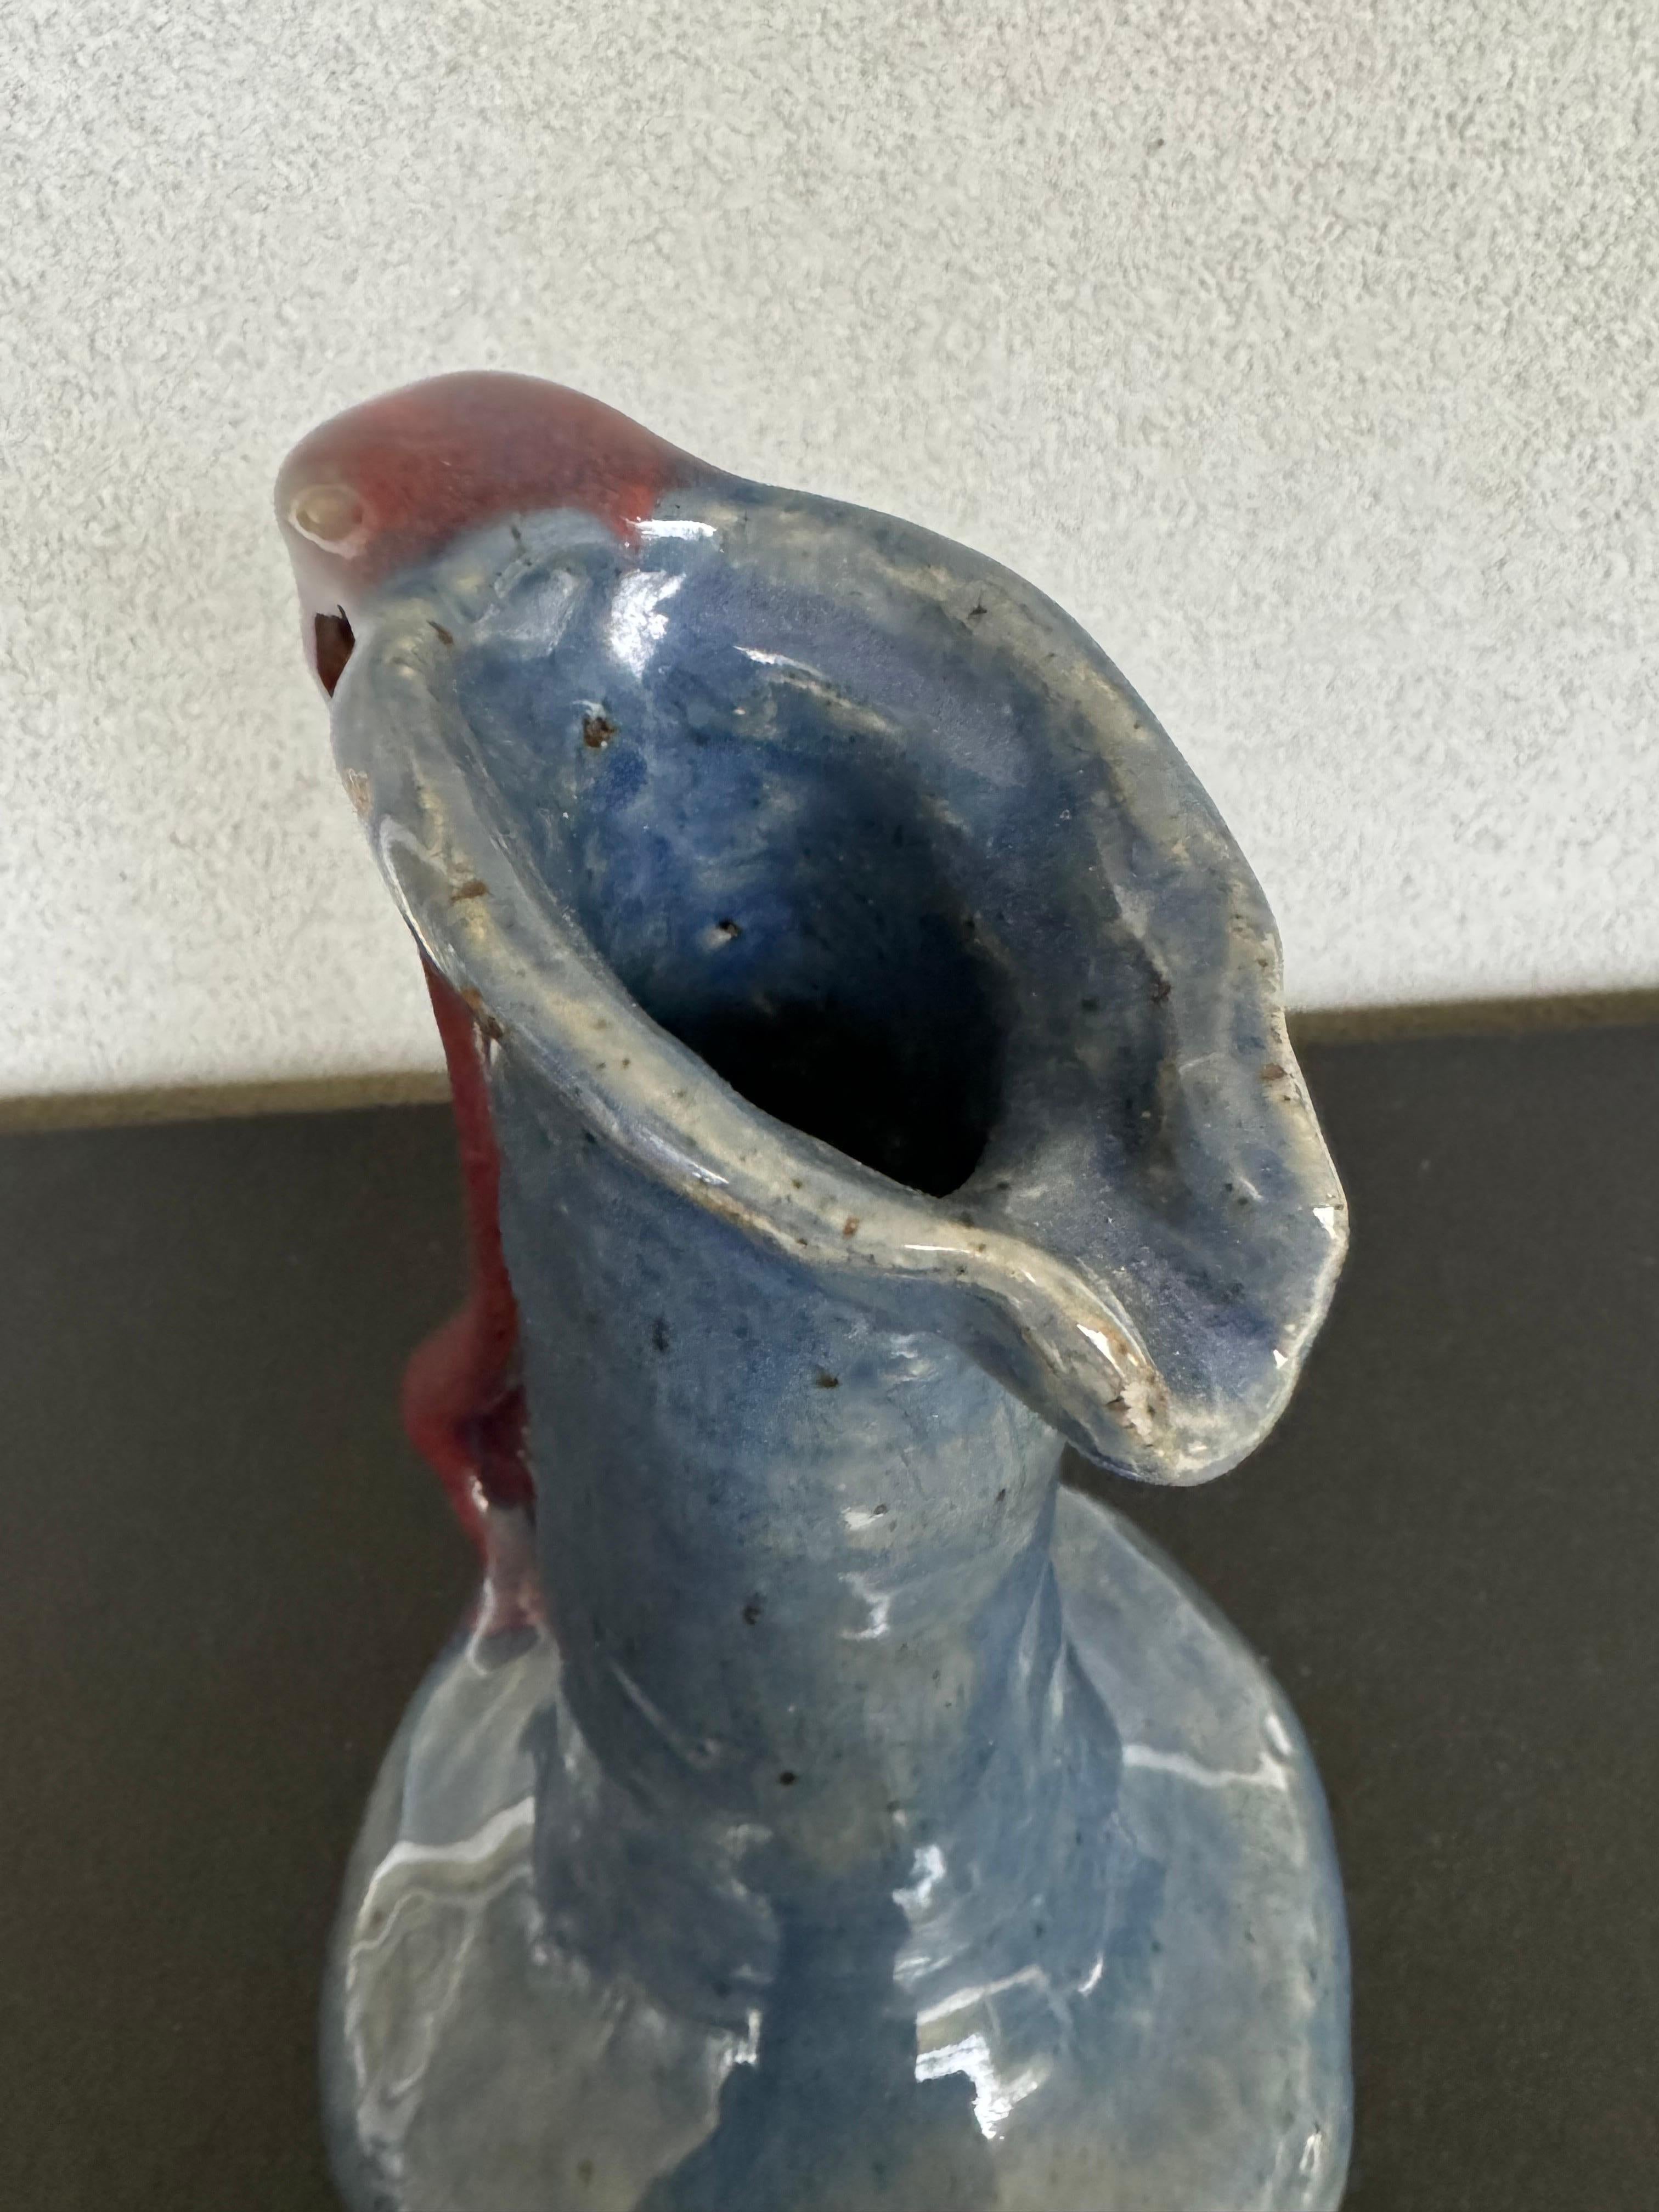 very unique blue glazed pottery pitcher with an organic shape handle in a burgundy color, it’s signed and dated on the bottom, looks like a student piece with its imperfections that make it even more adorable and a true one of kind piece of art